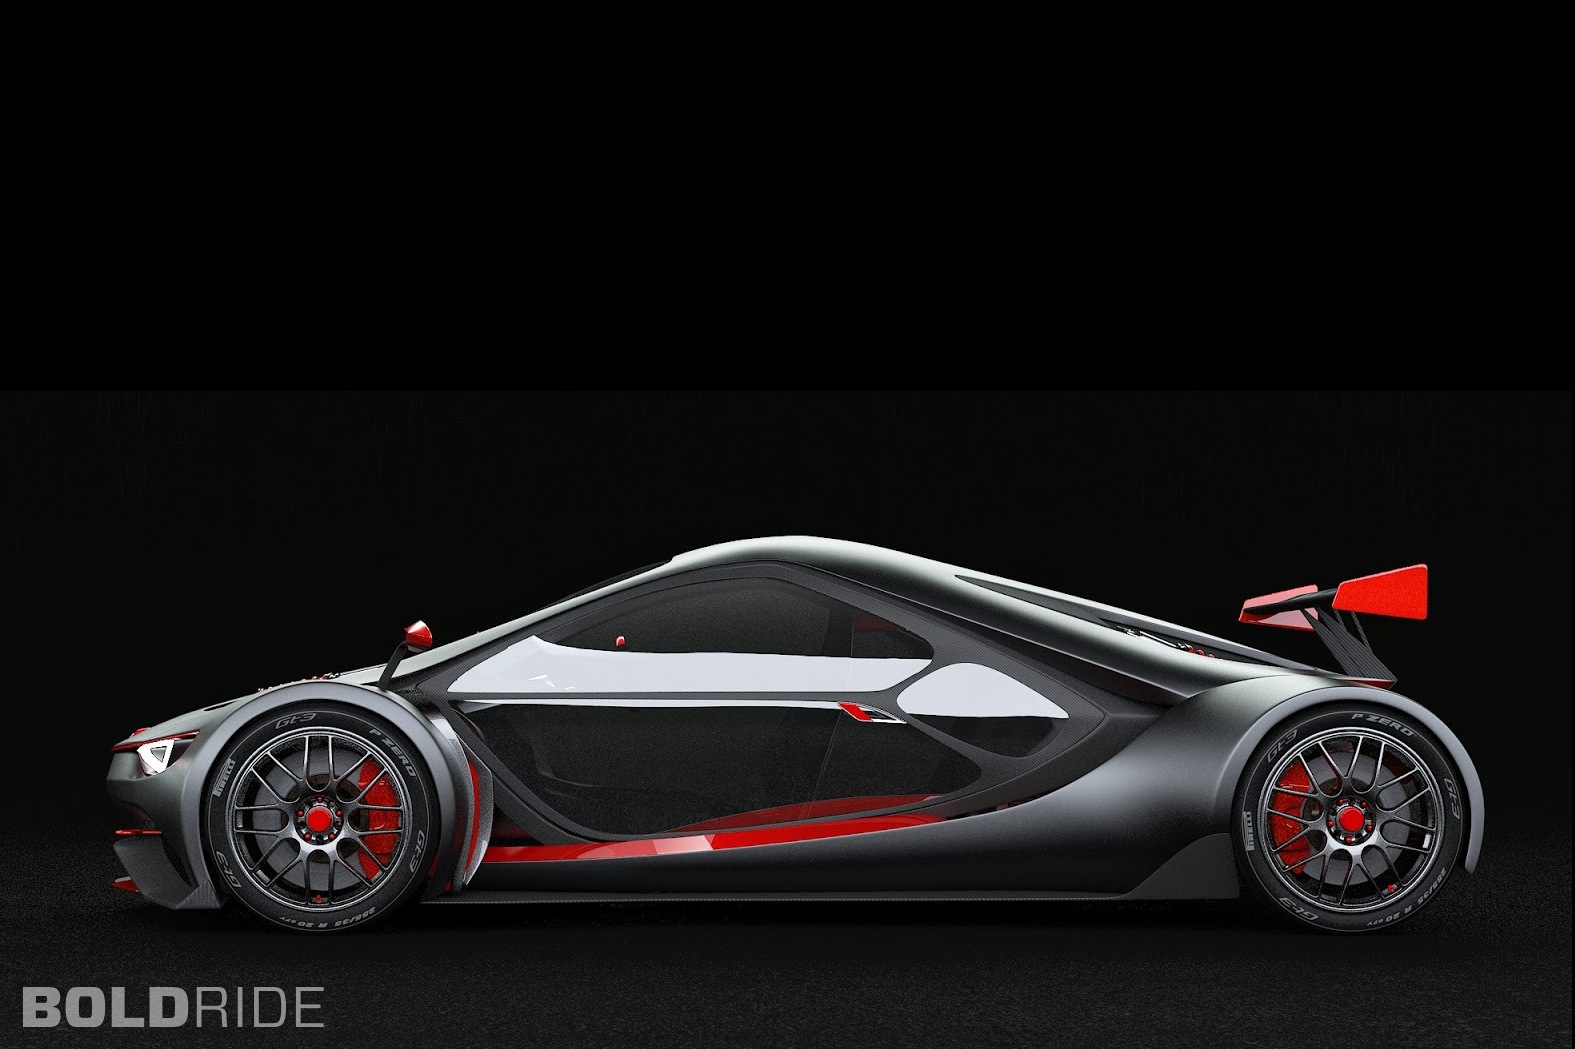 2013, Renault, Fly, Gt, Concept, Supercar, G t Wallpaper